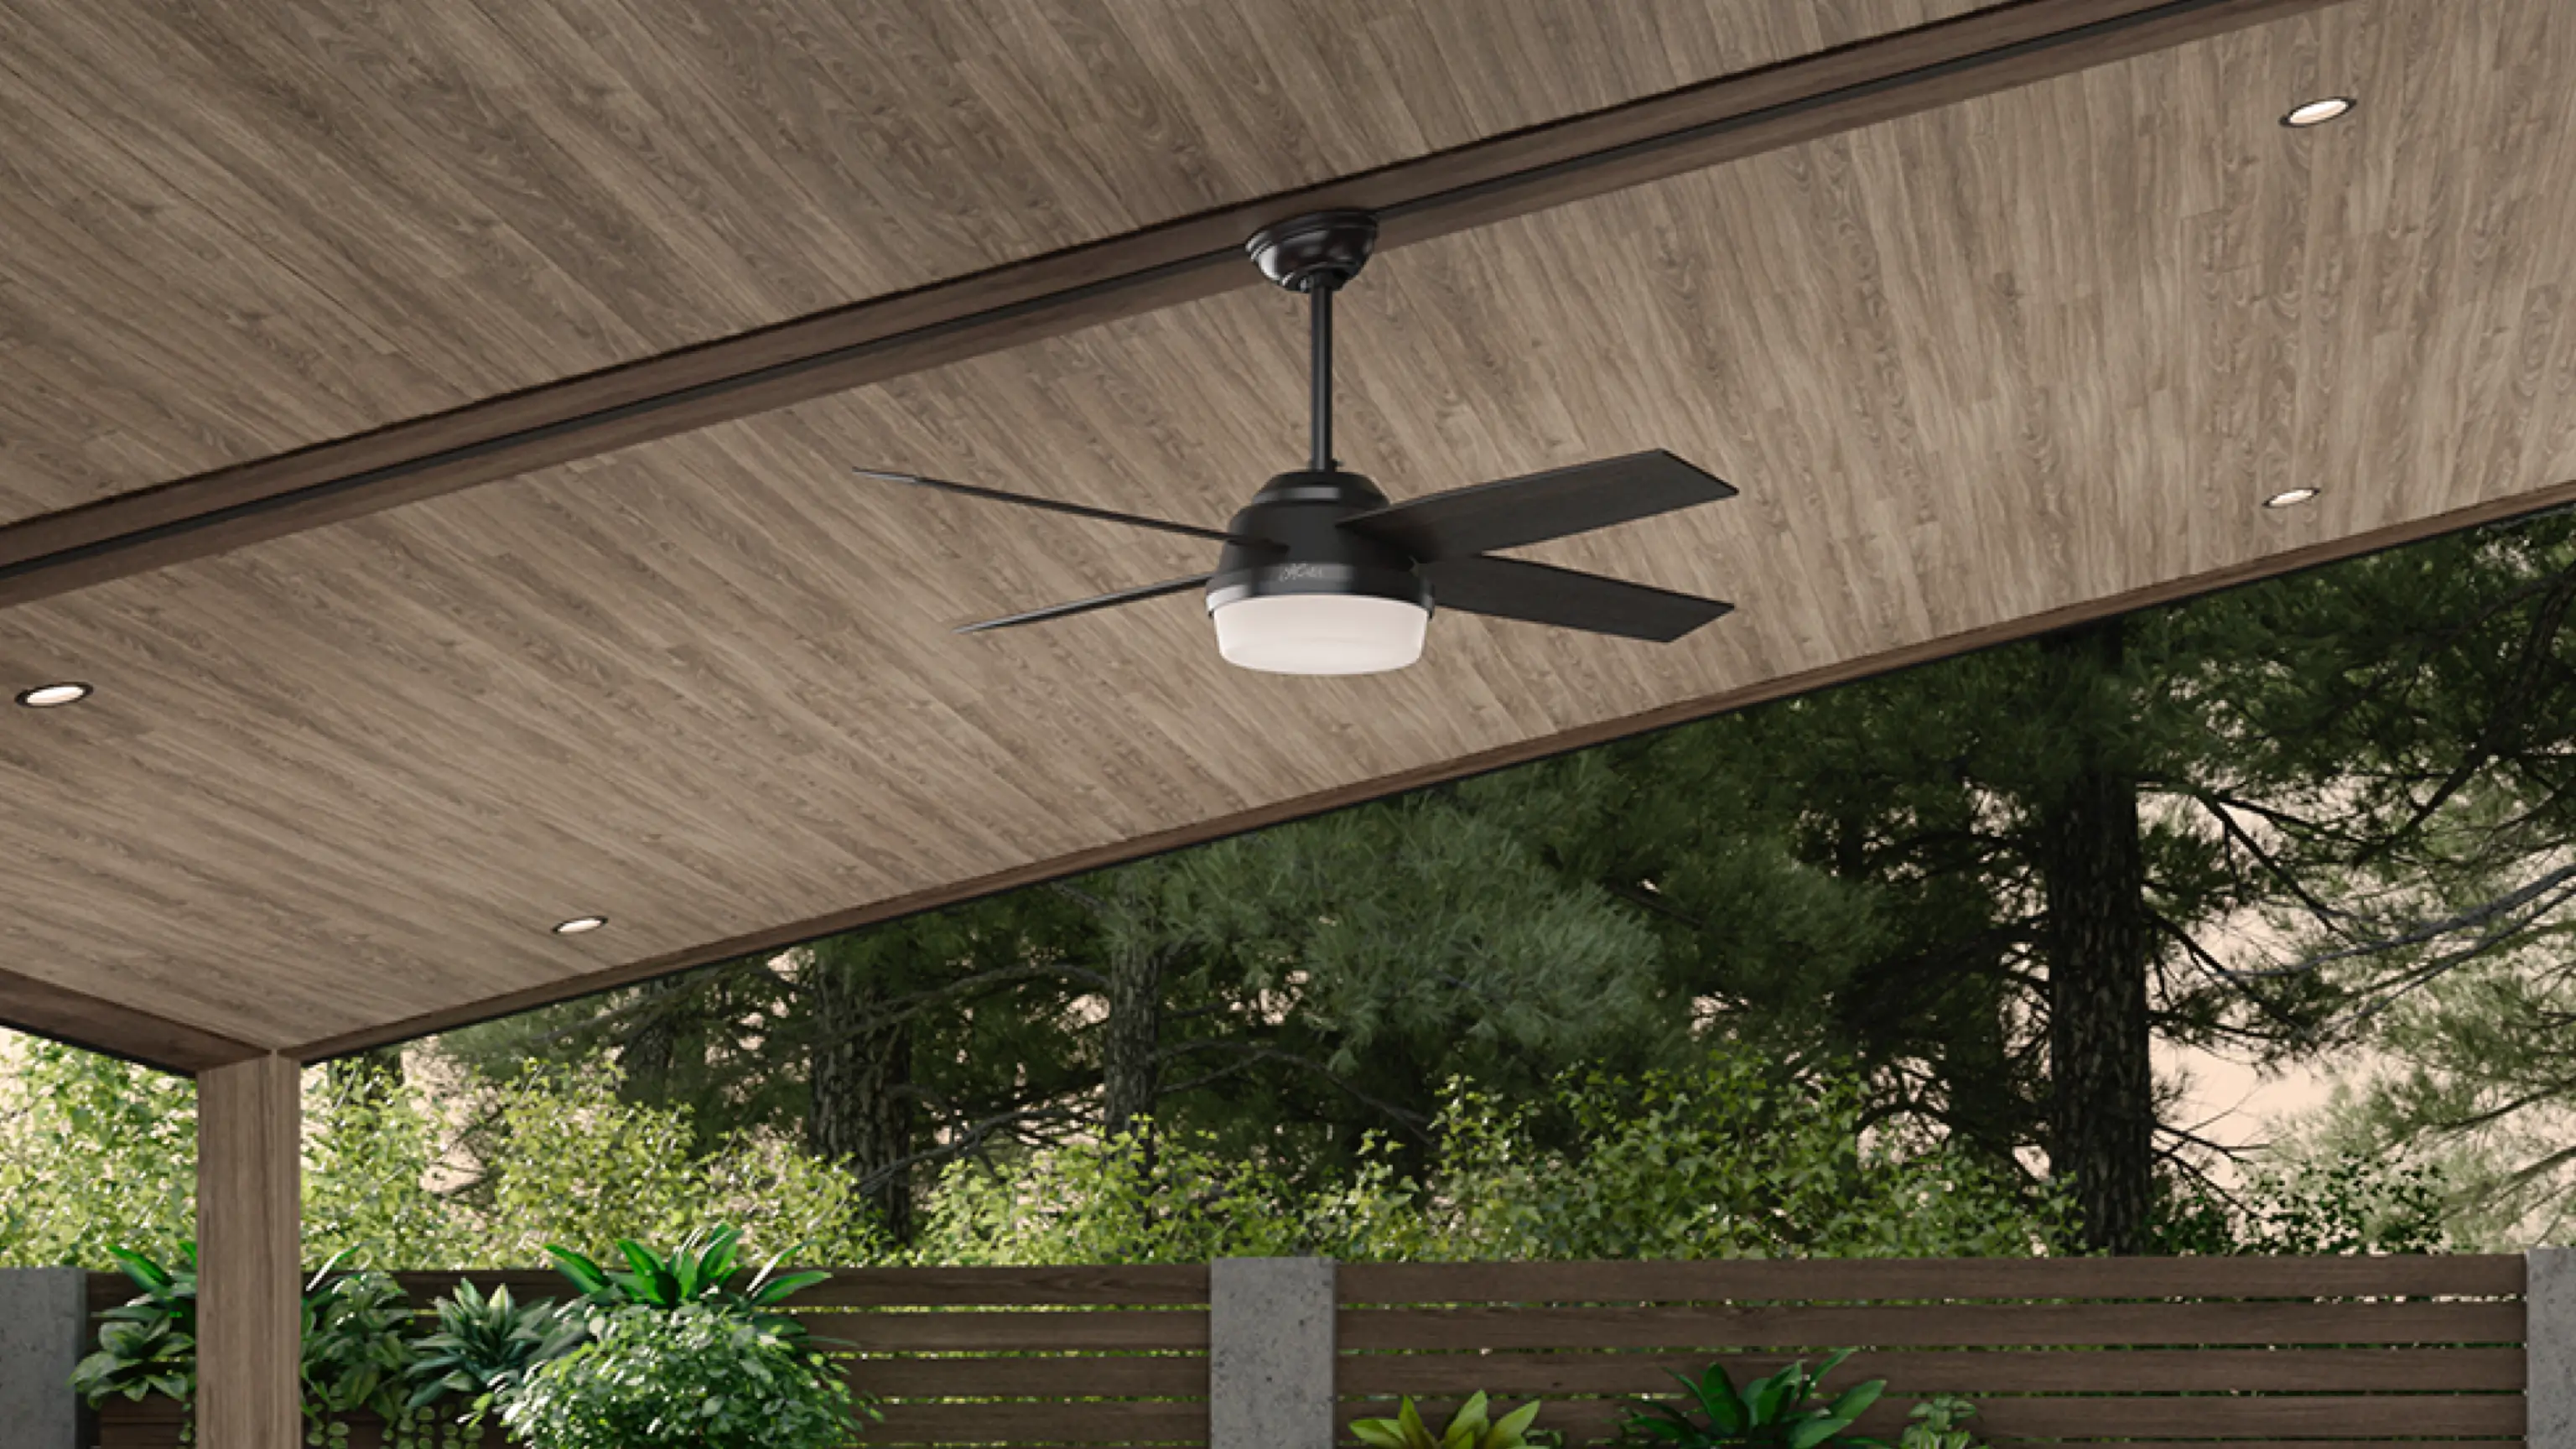 Hunter Fan and overhead light product hanging in indoor-outdoor space.